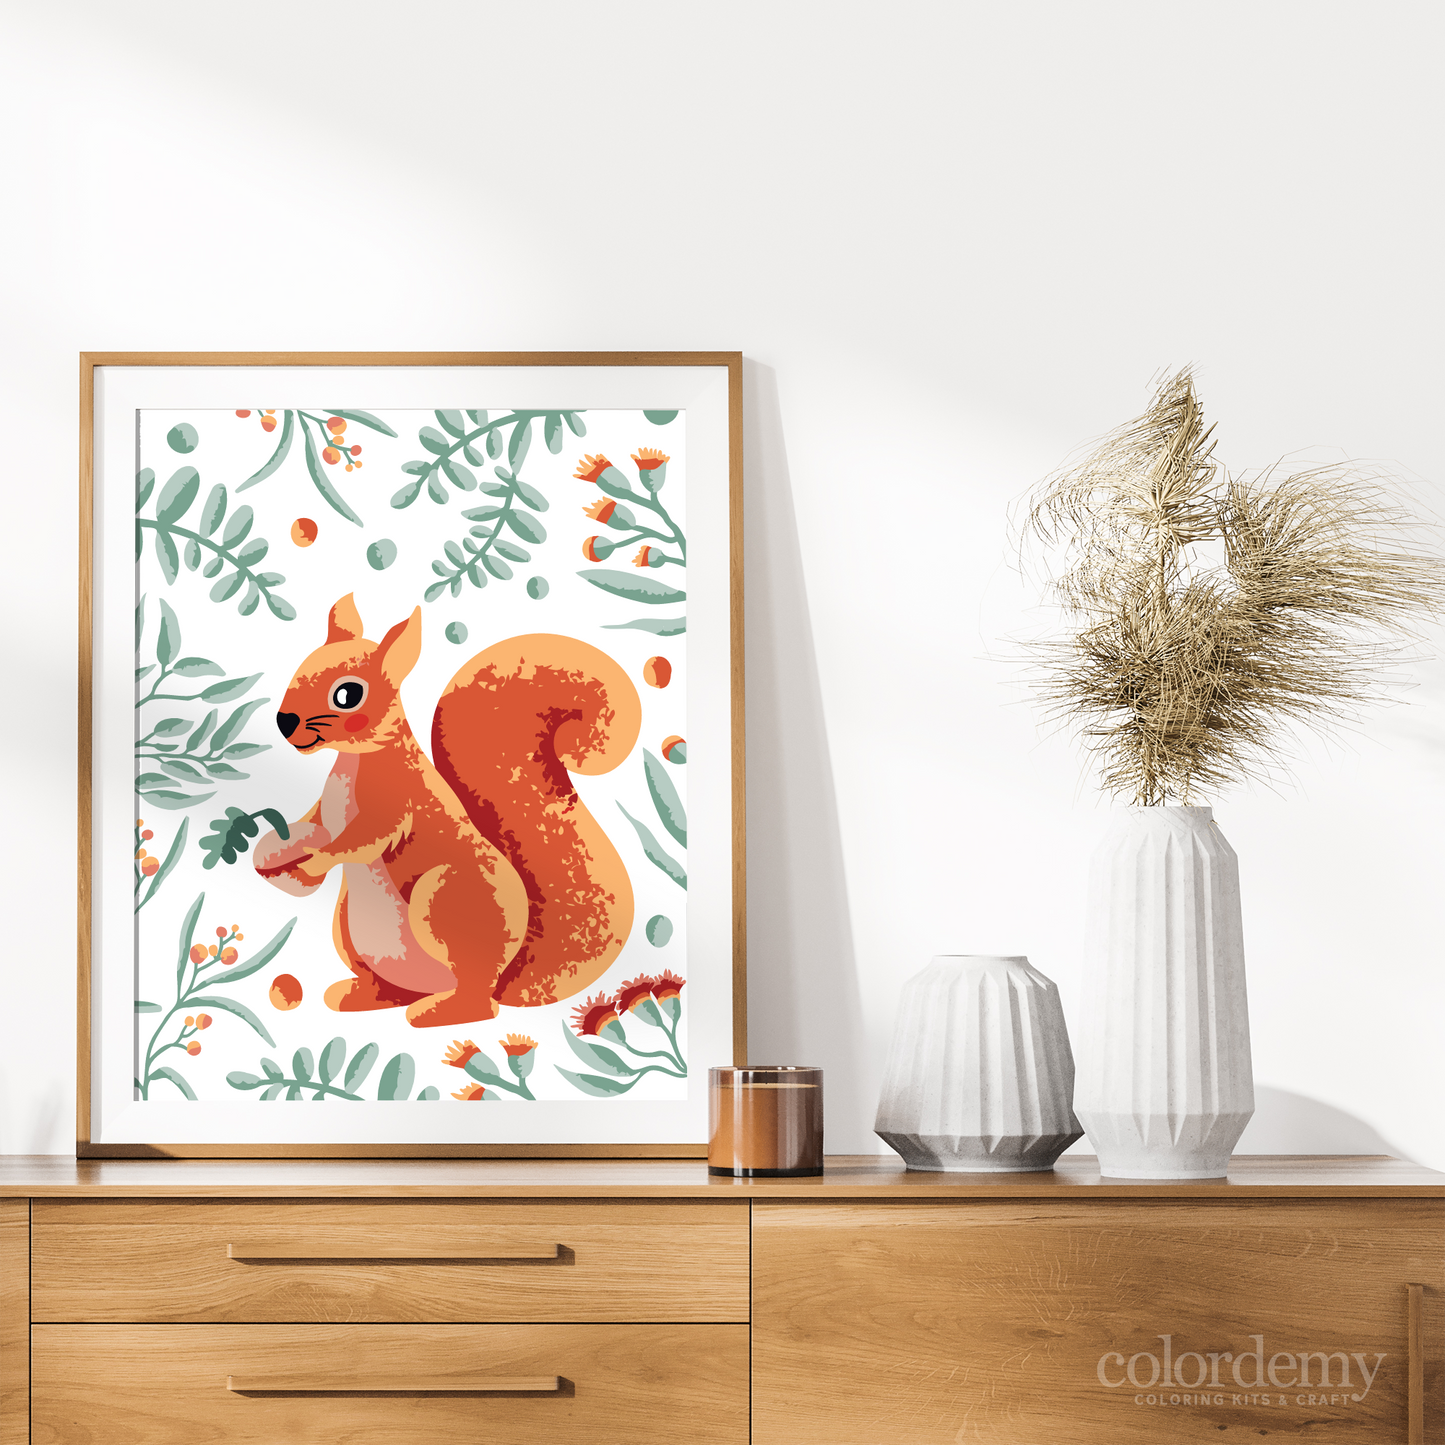 40x50cm Paint by Numbers Kit: Woodland Whimsy: Squirrel with Leafy Background